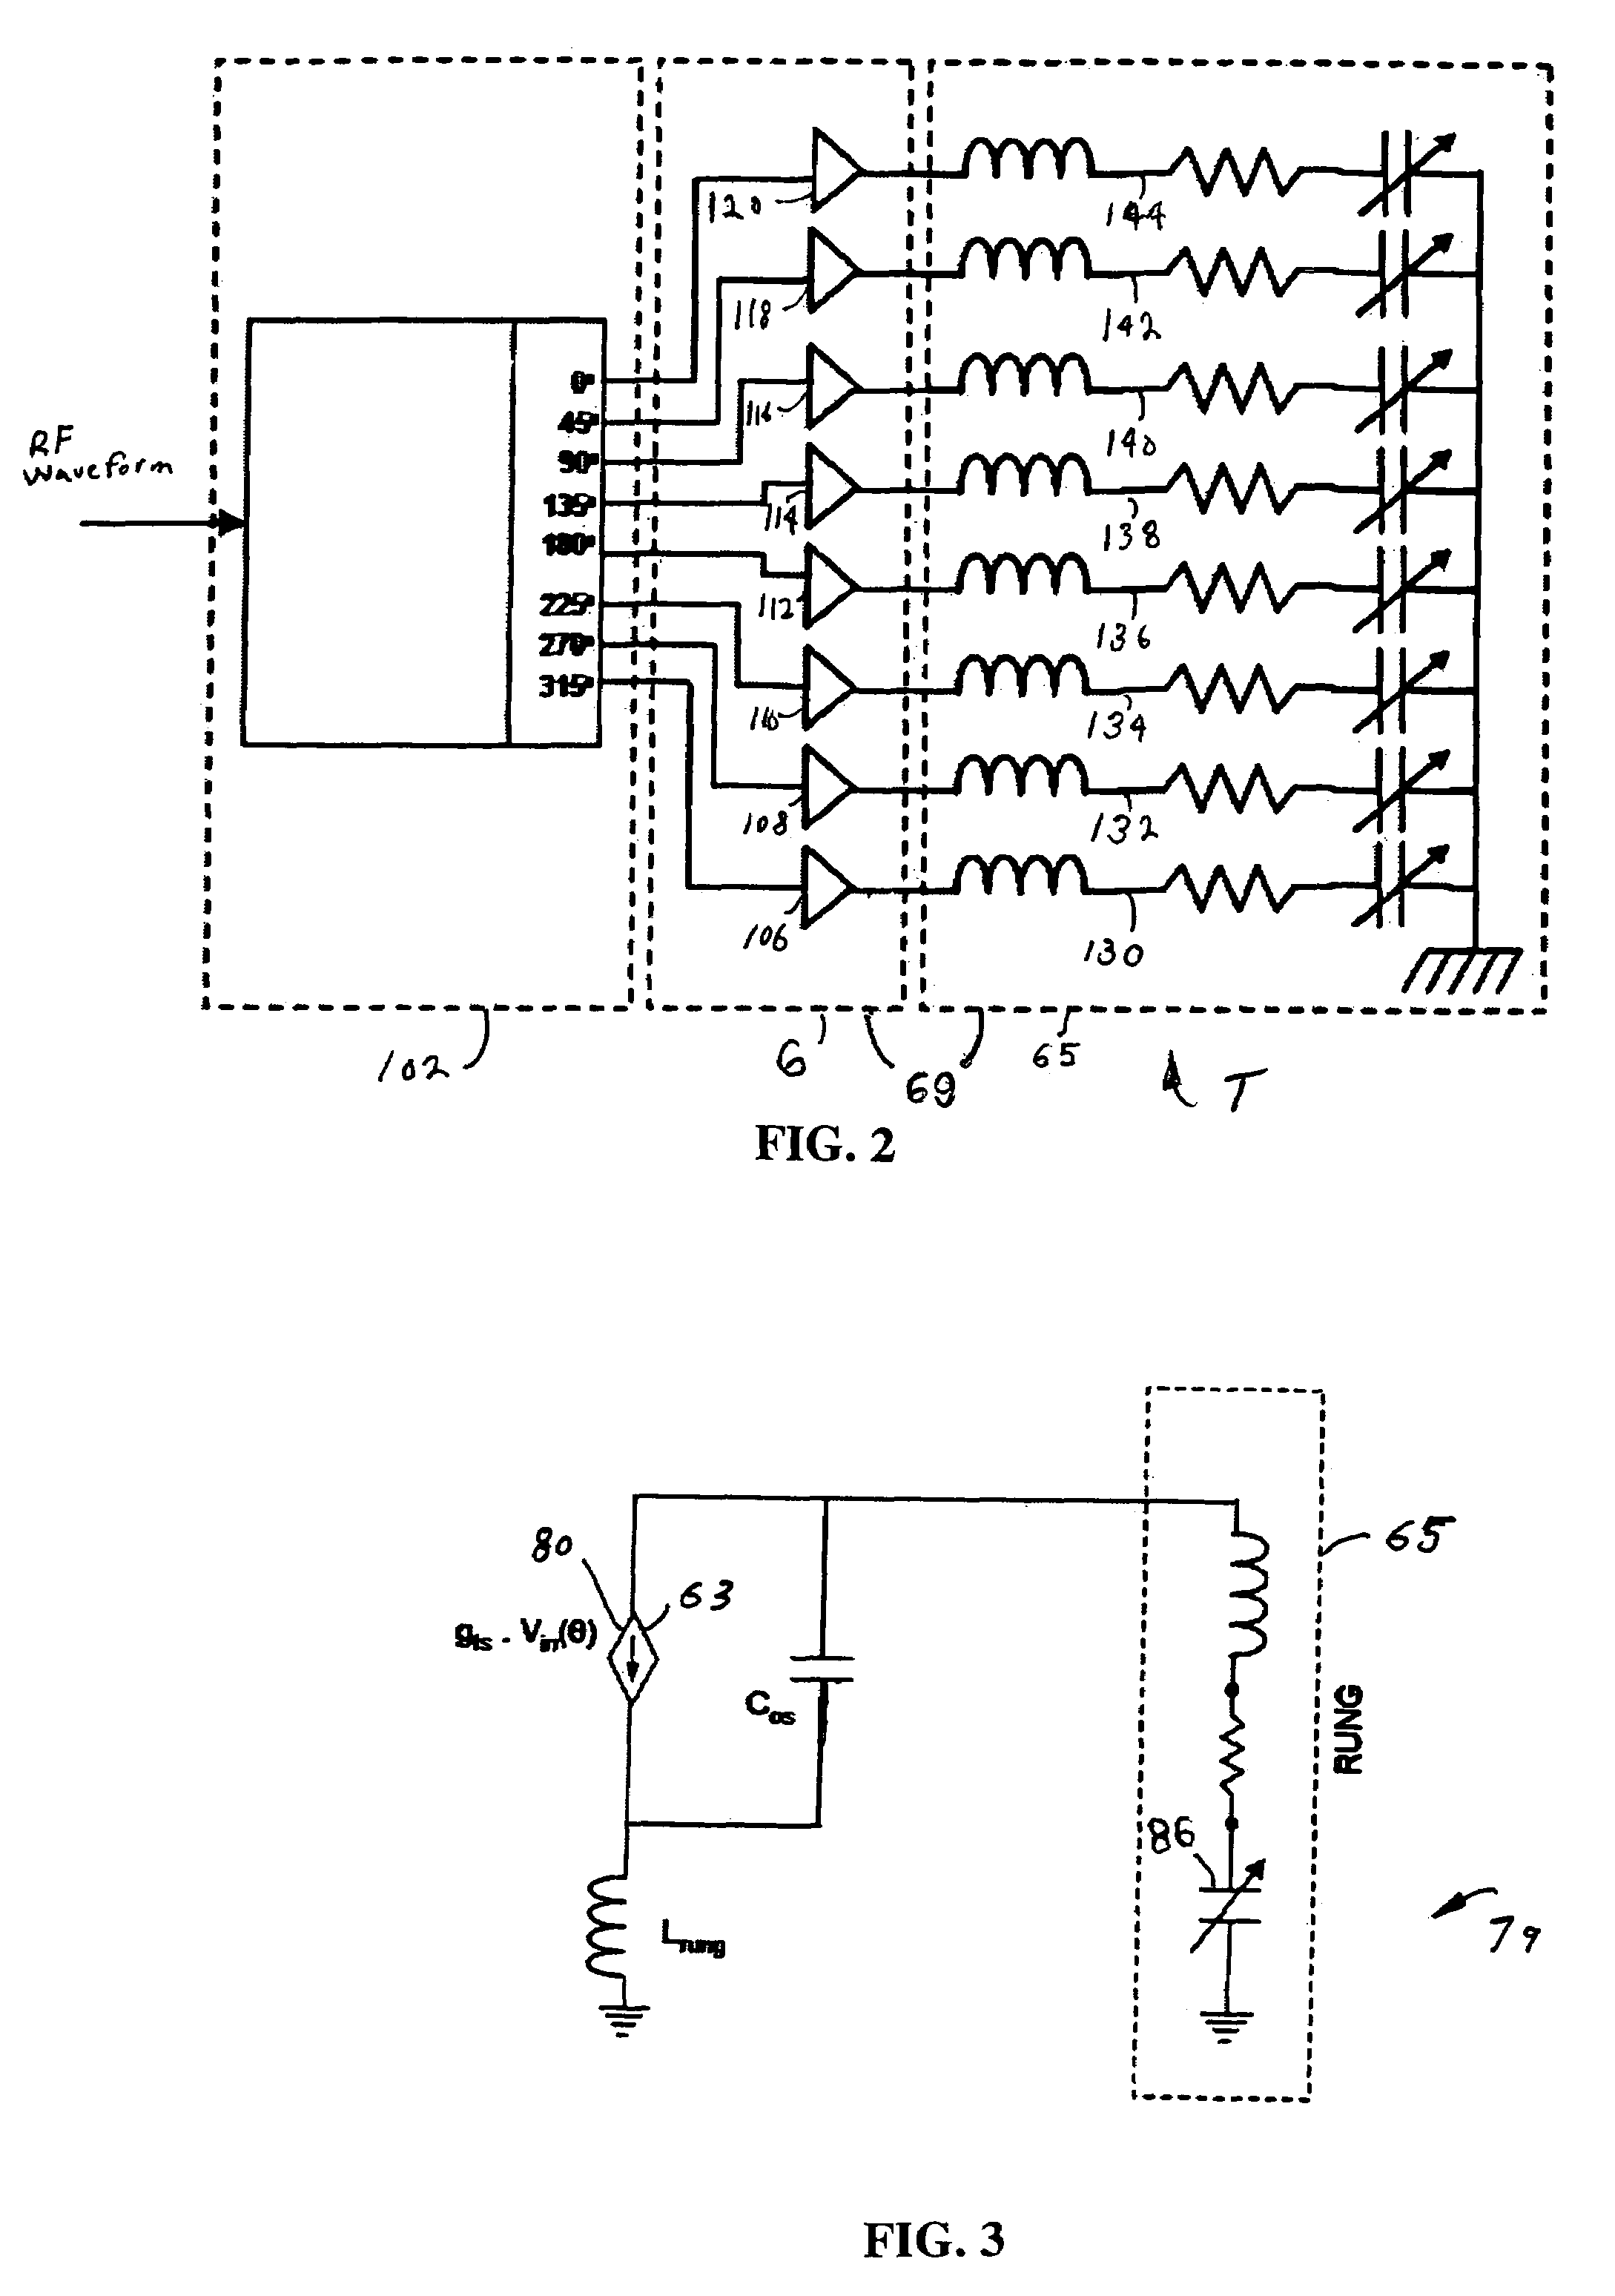 System and method for operating transmit or transmit/receive elements in an MR system